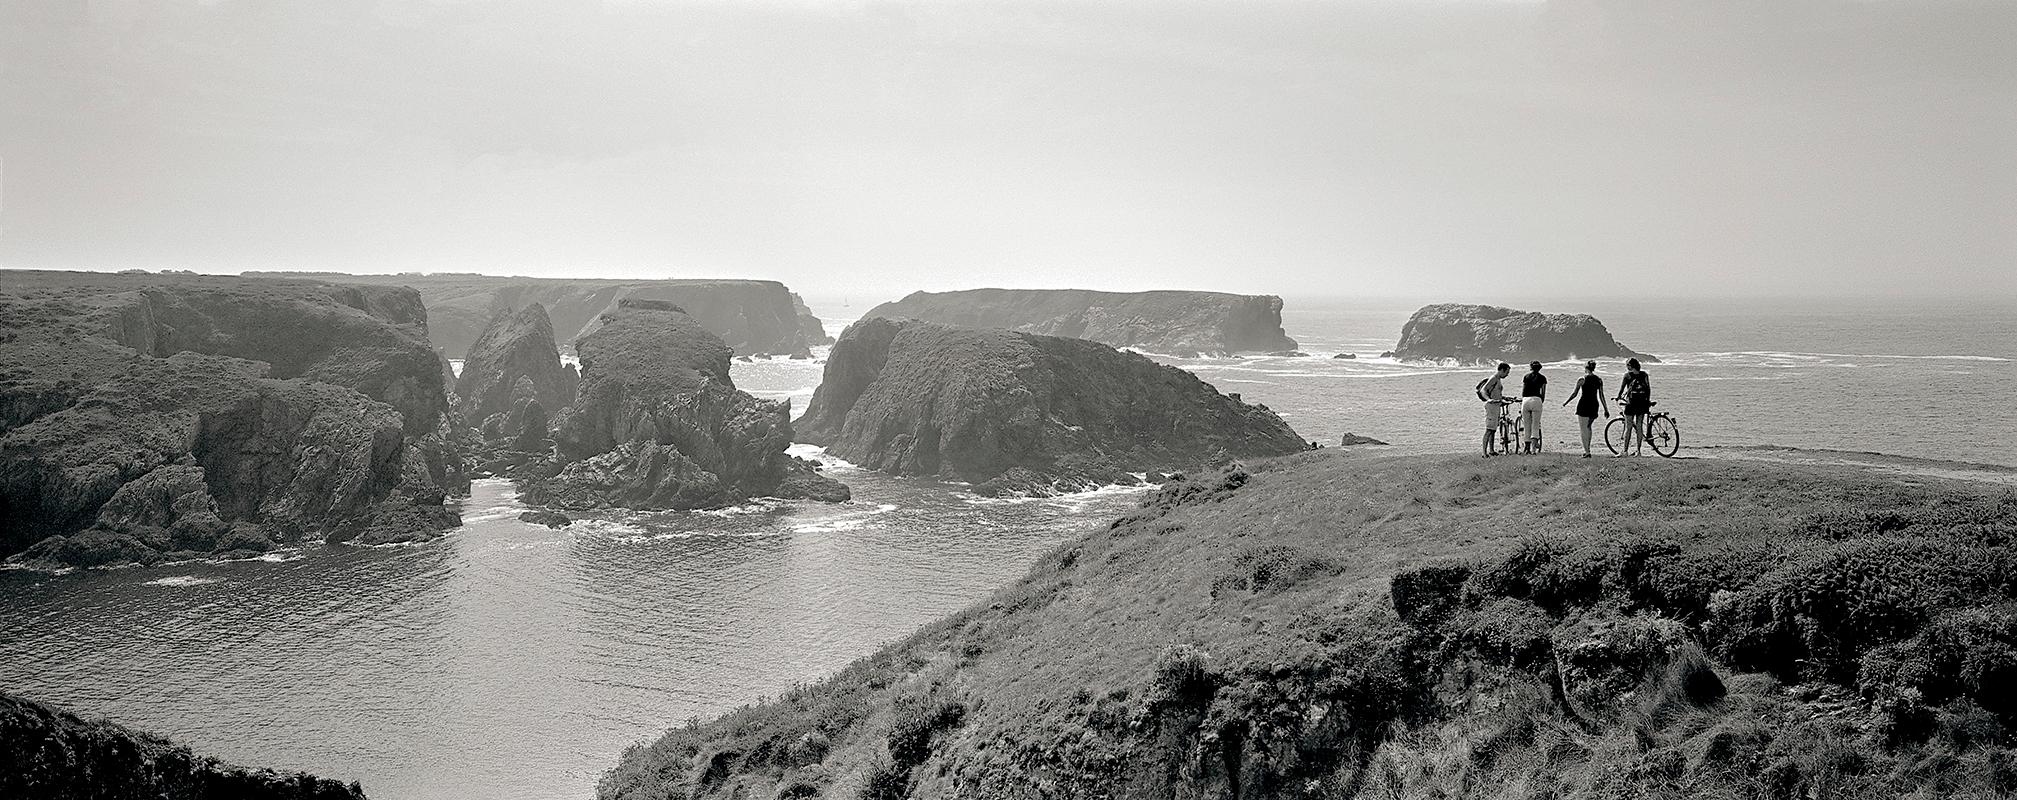 Panorama - black and white photography, Limited edition print, Landscape